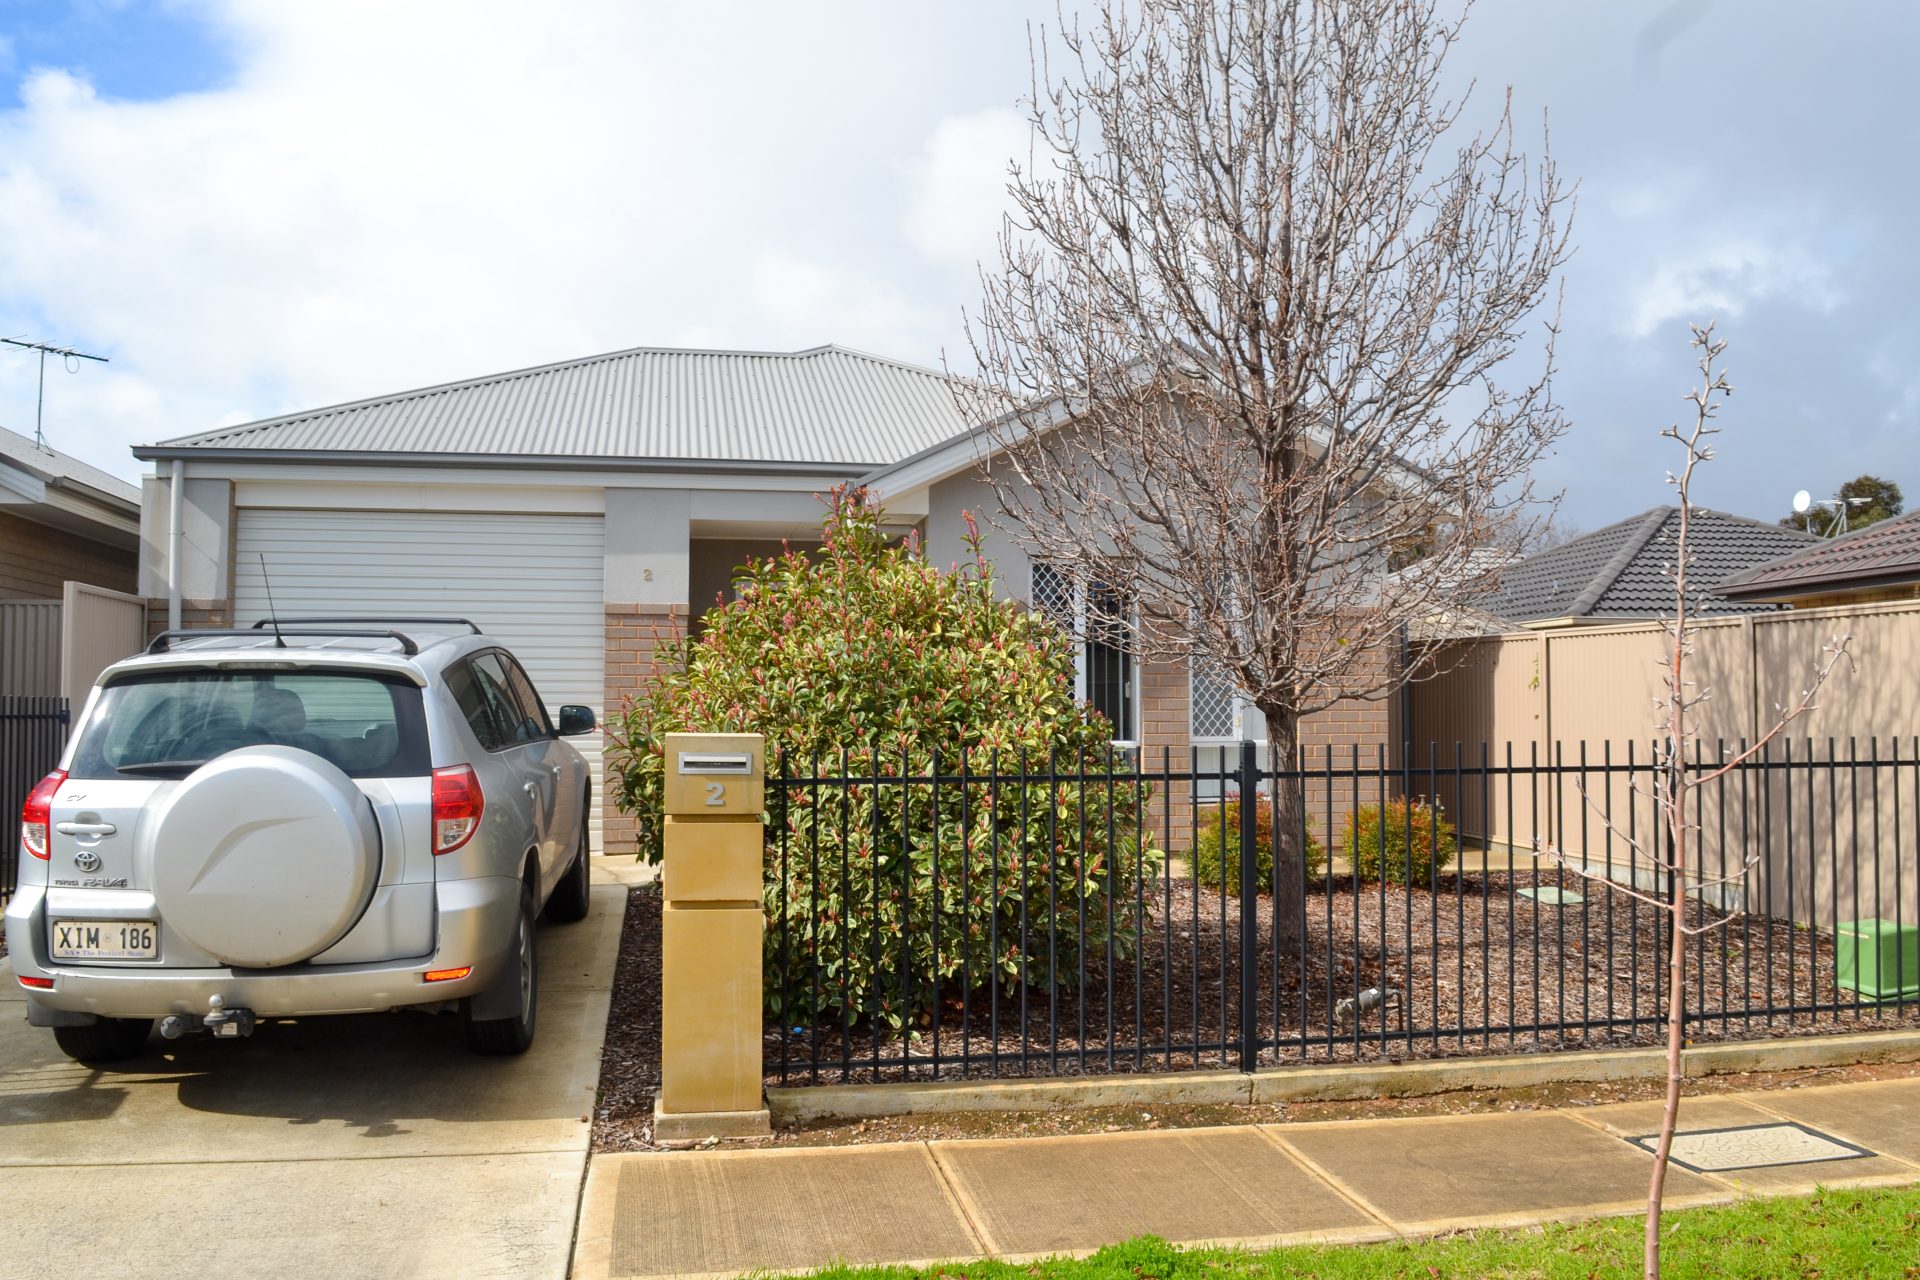 Facade of home - beige brick home with grey tin rood. A black post fence with small front yard. 